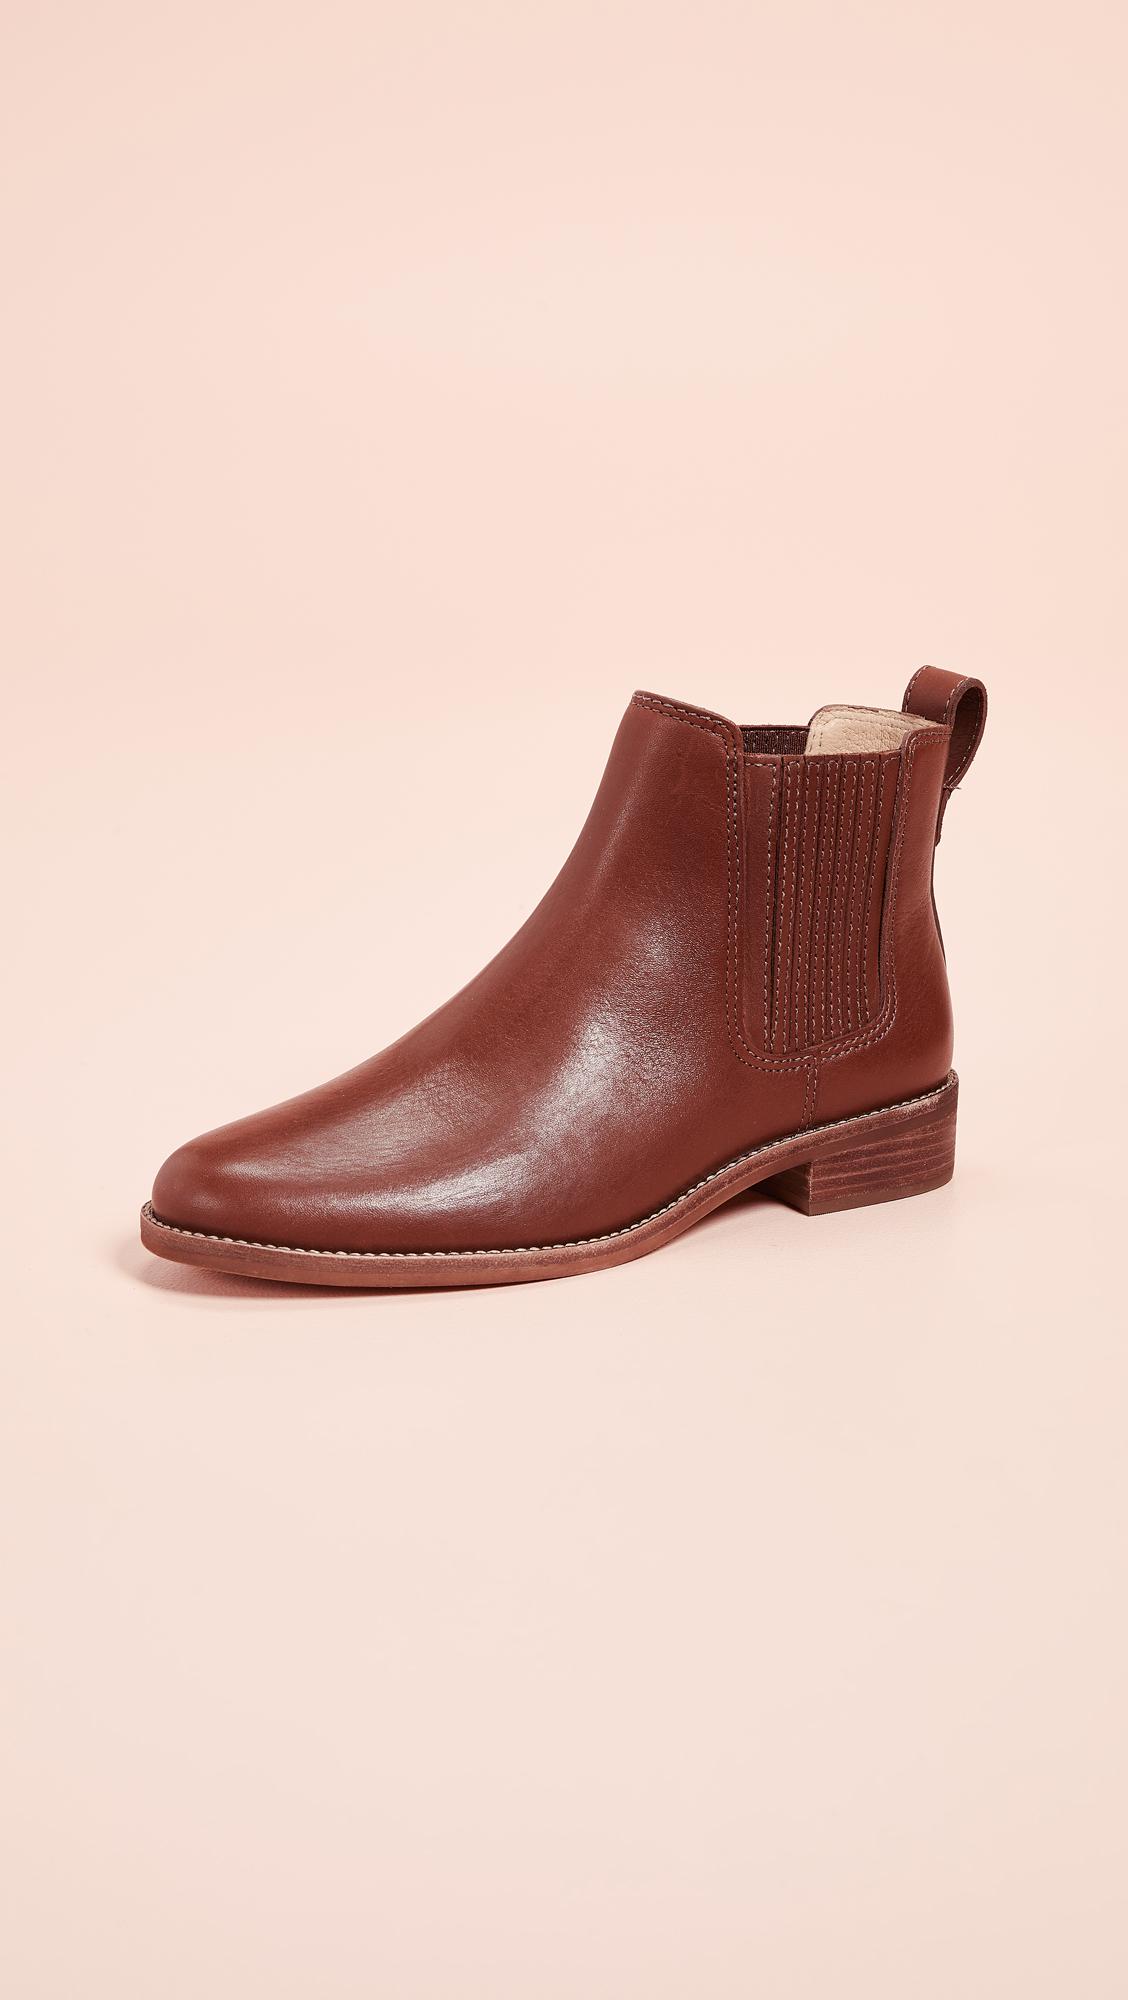 Madewell $228 The Hayes Boots 7.5 pecan ankle shoes leather b2064 brown